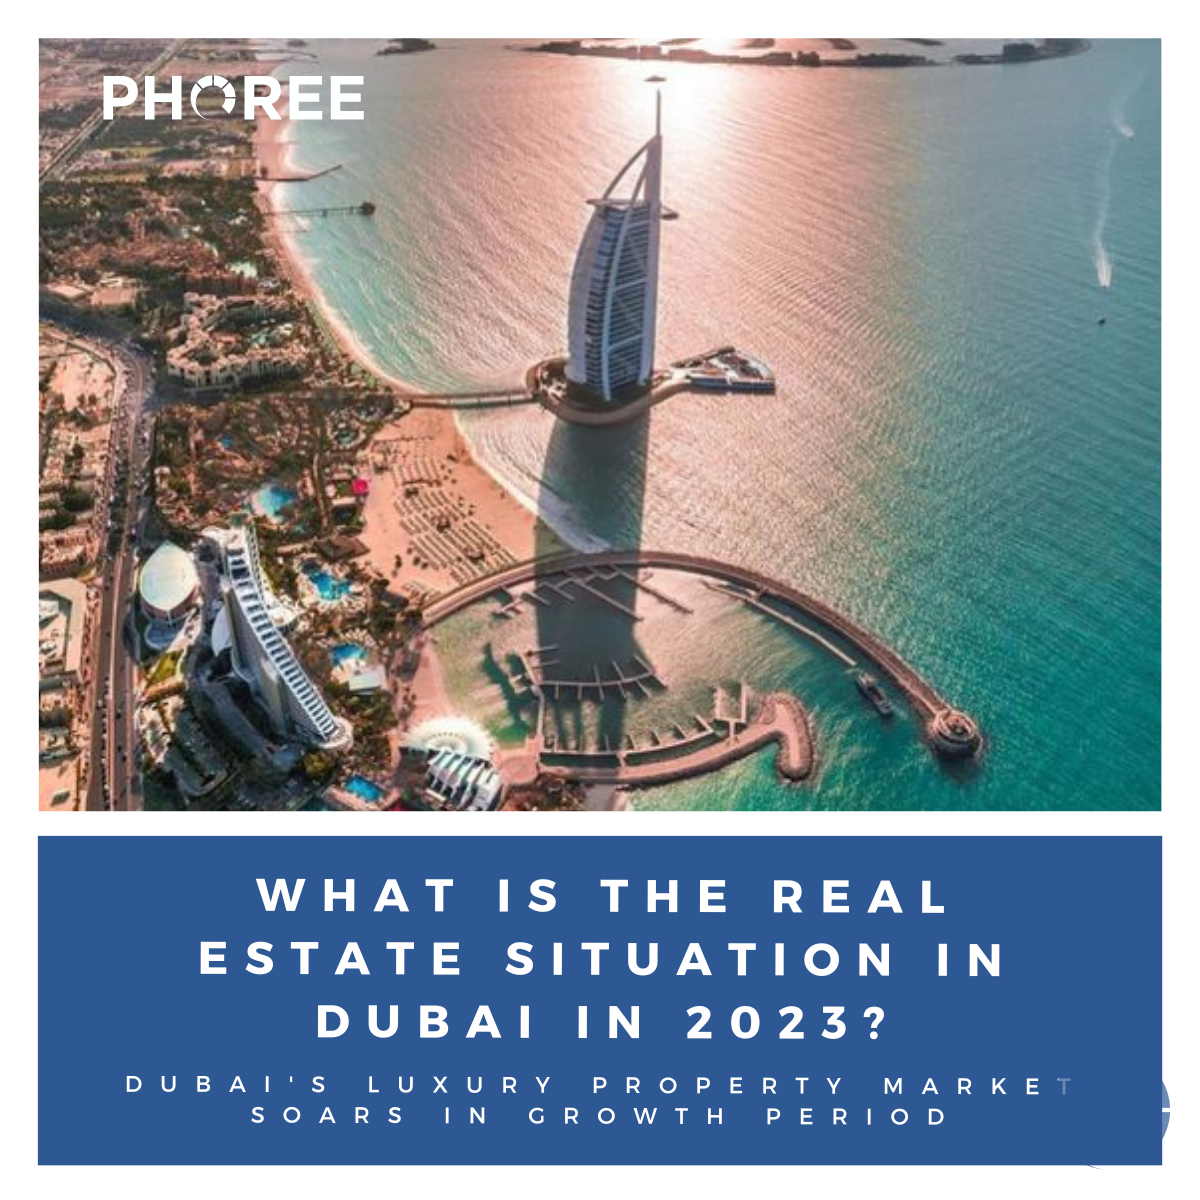 WHAT IS THE REAL ESTATE SITUATION IN DUBAI IN 2023